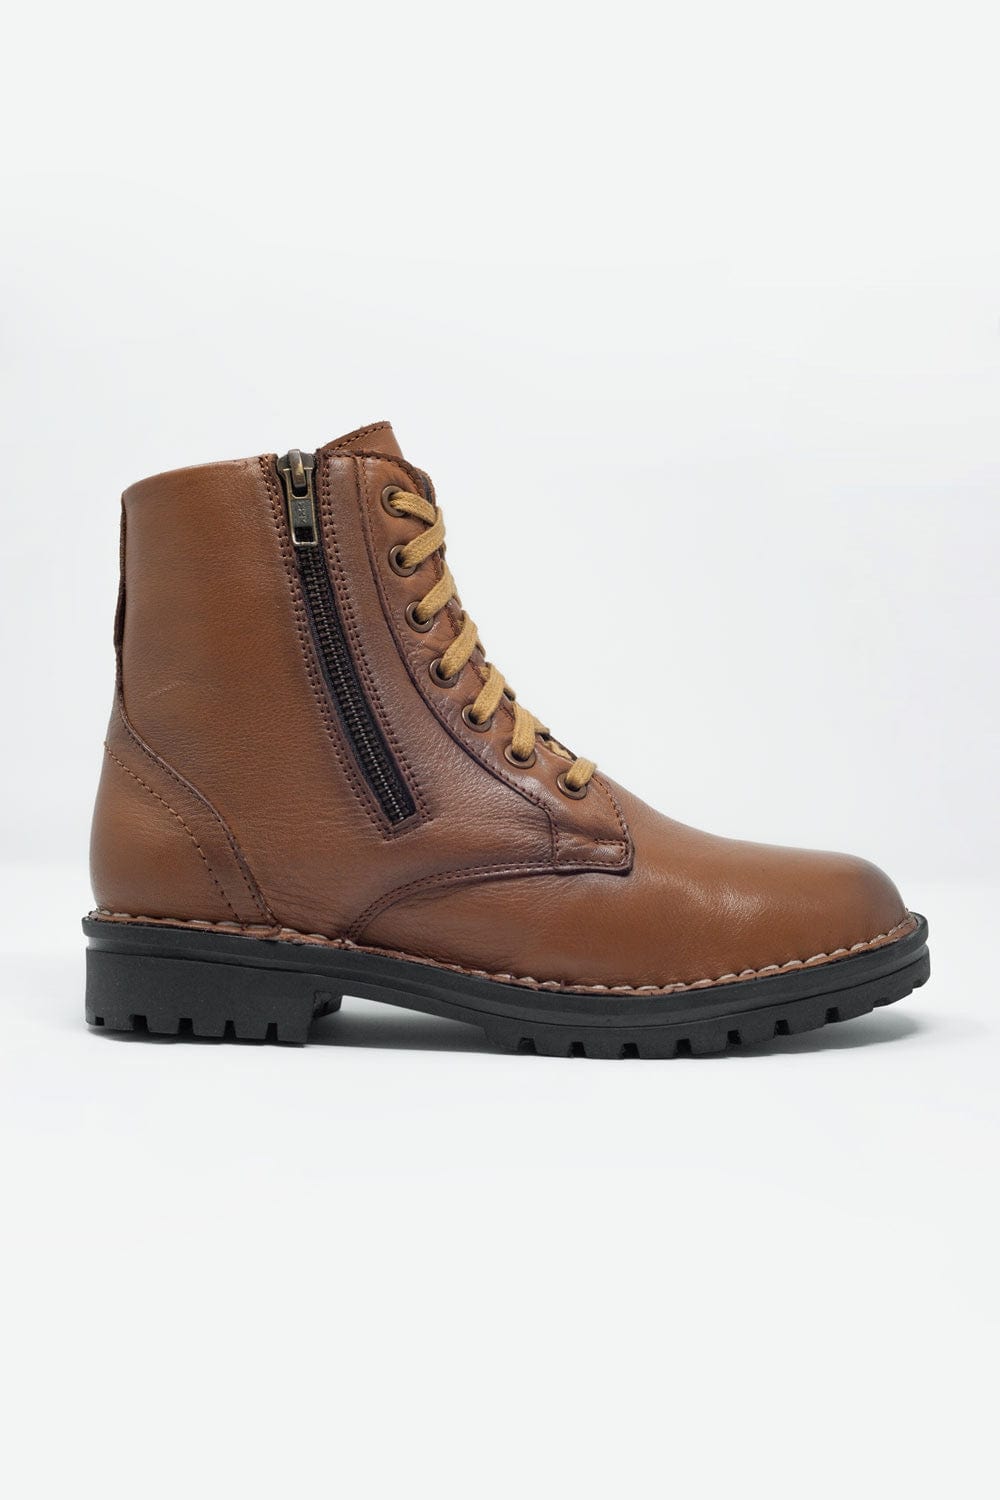 Q2 Women's Boots Chunky Military Boots in Brown